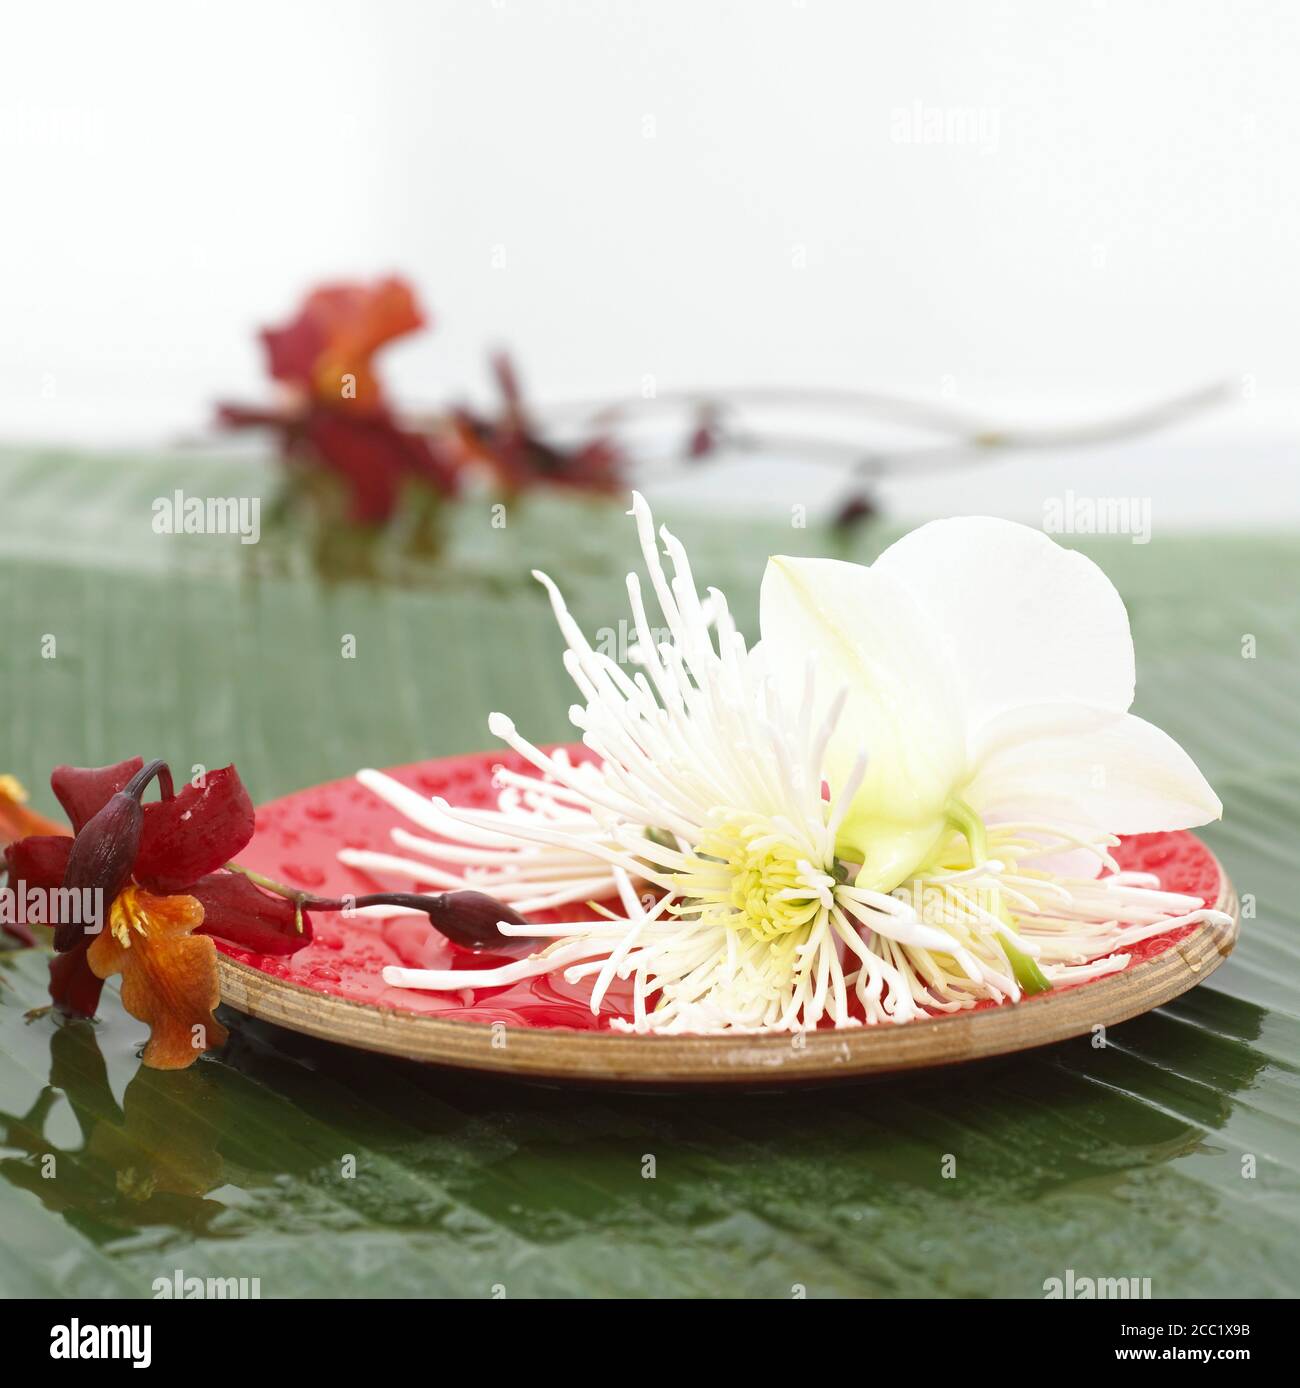 Blossoms on wooden plate, close-up Stock Photo